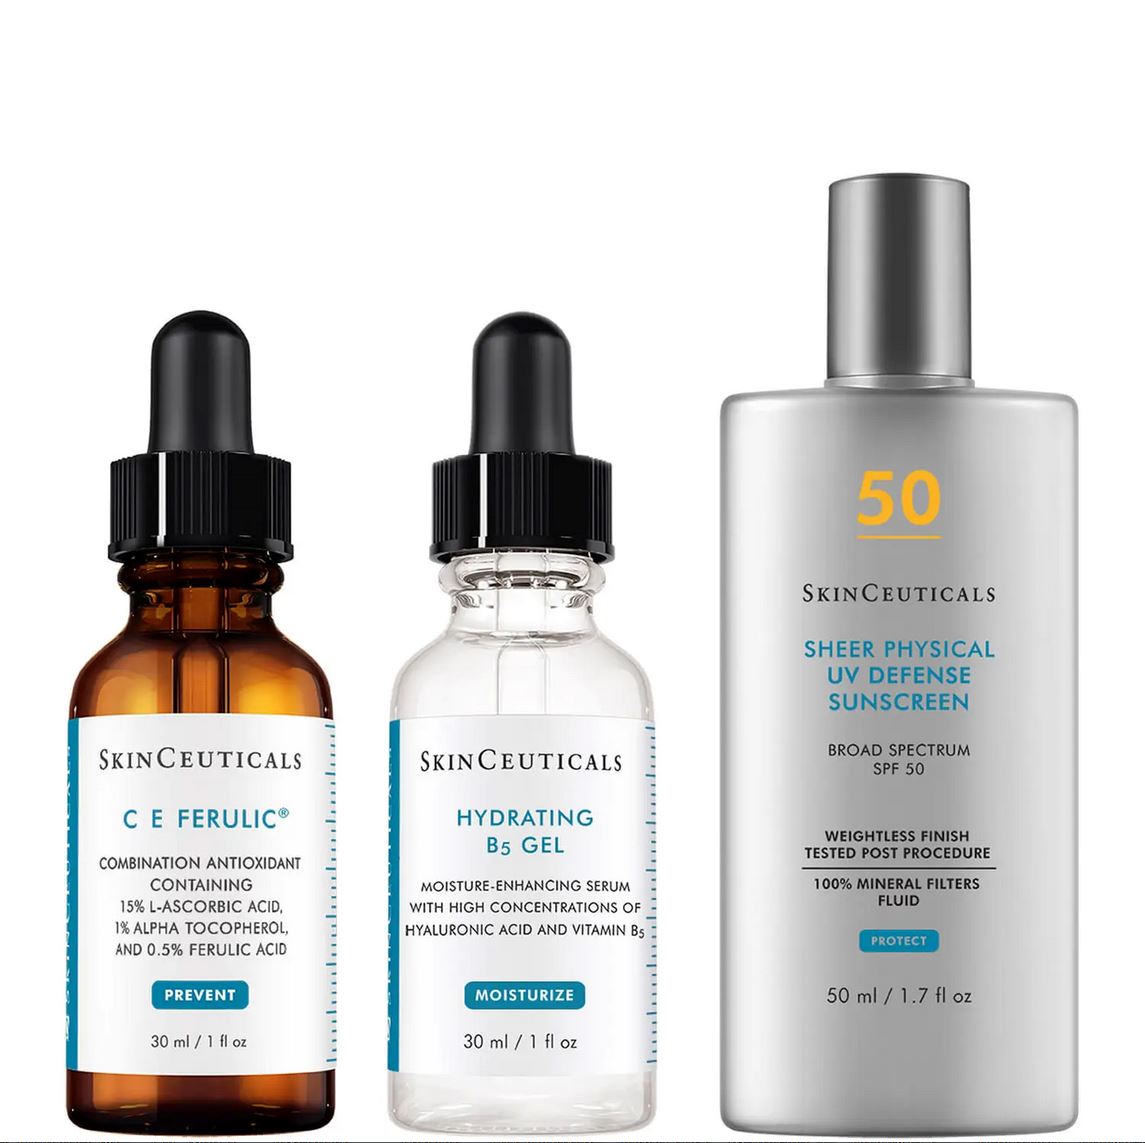 SkinCeuticals Vitamin C and Mineral Sunscreen Kit for Dry Skin SkinCeuticals Shop at Exclusive Beauty Club